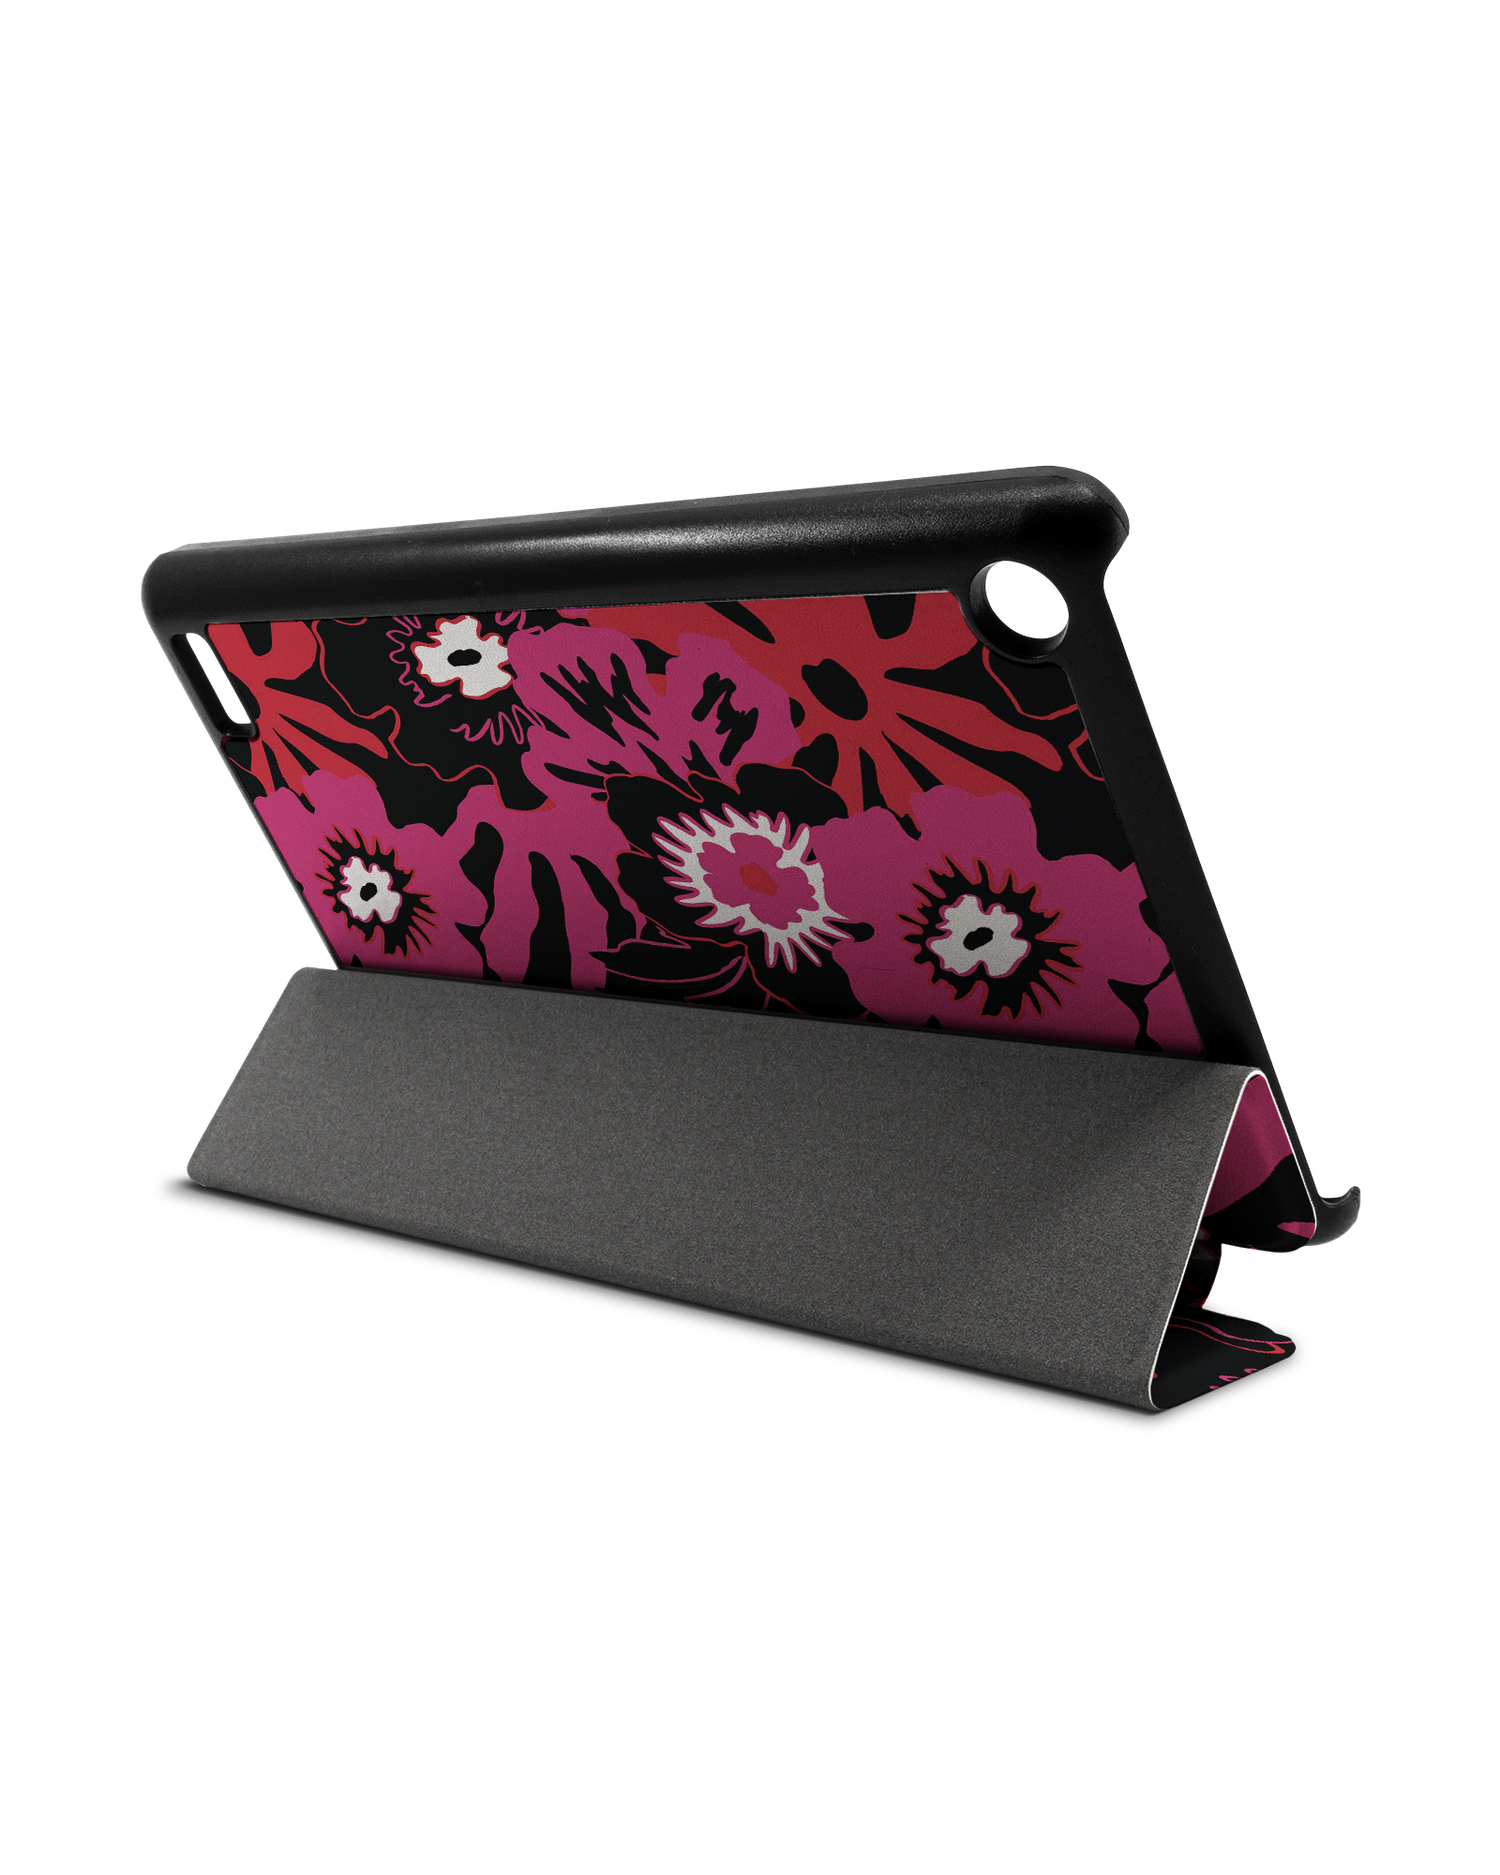 Flower Works Tablet Smart Case for Amazon Fire 7: Used as Stand